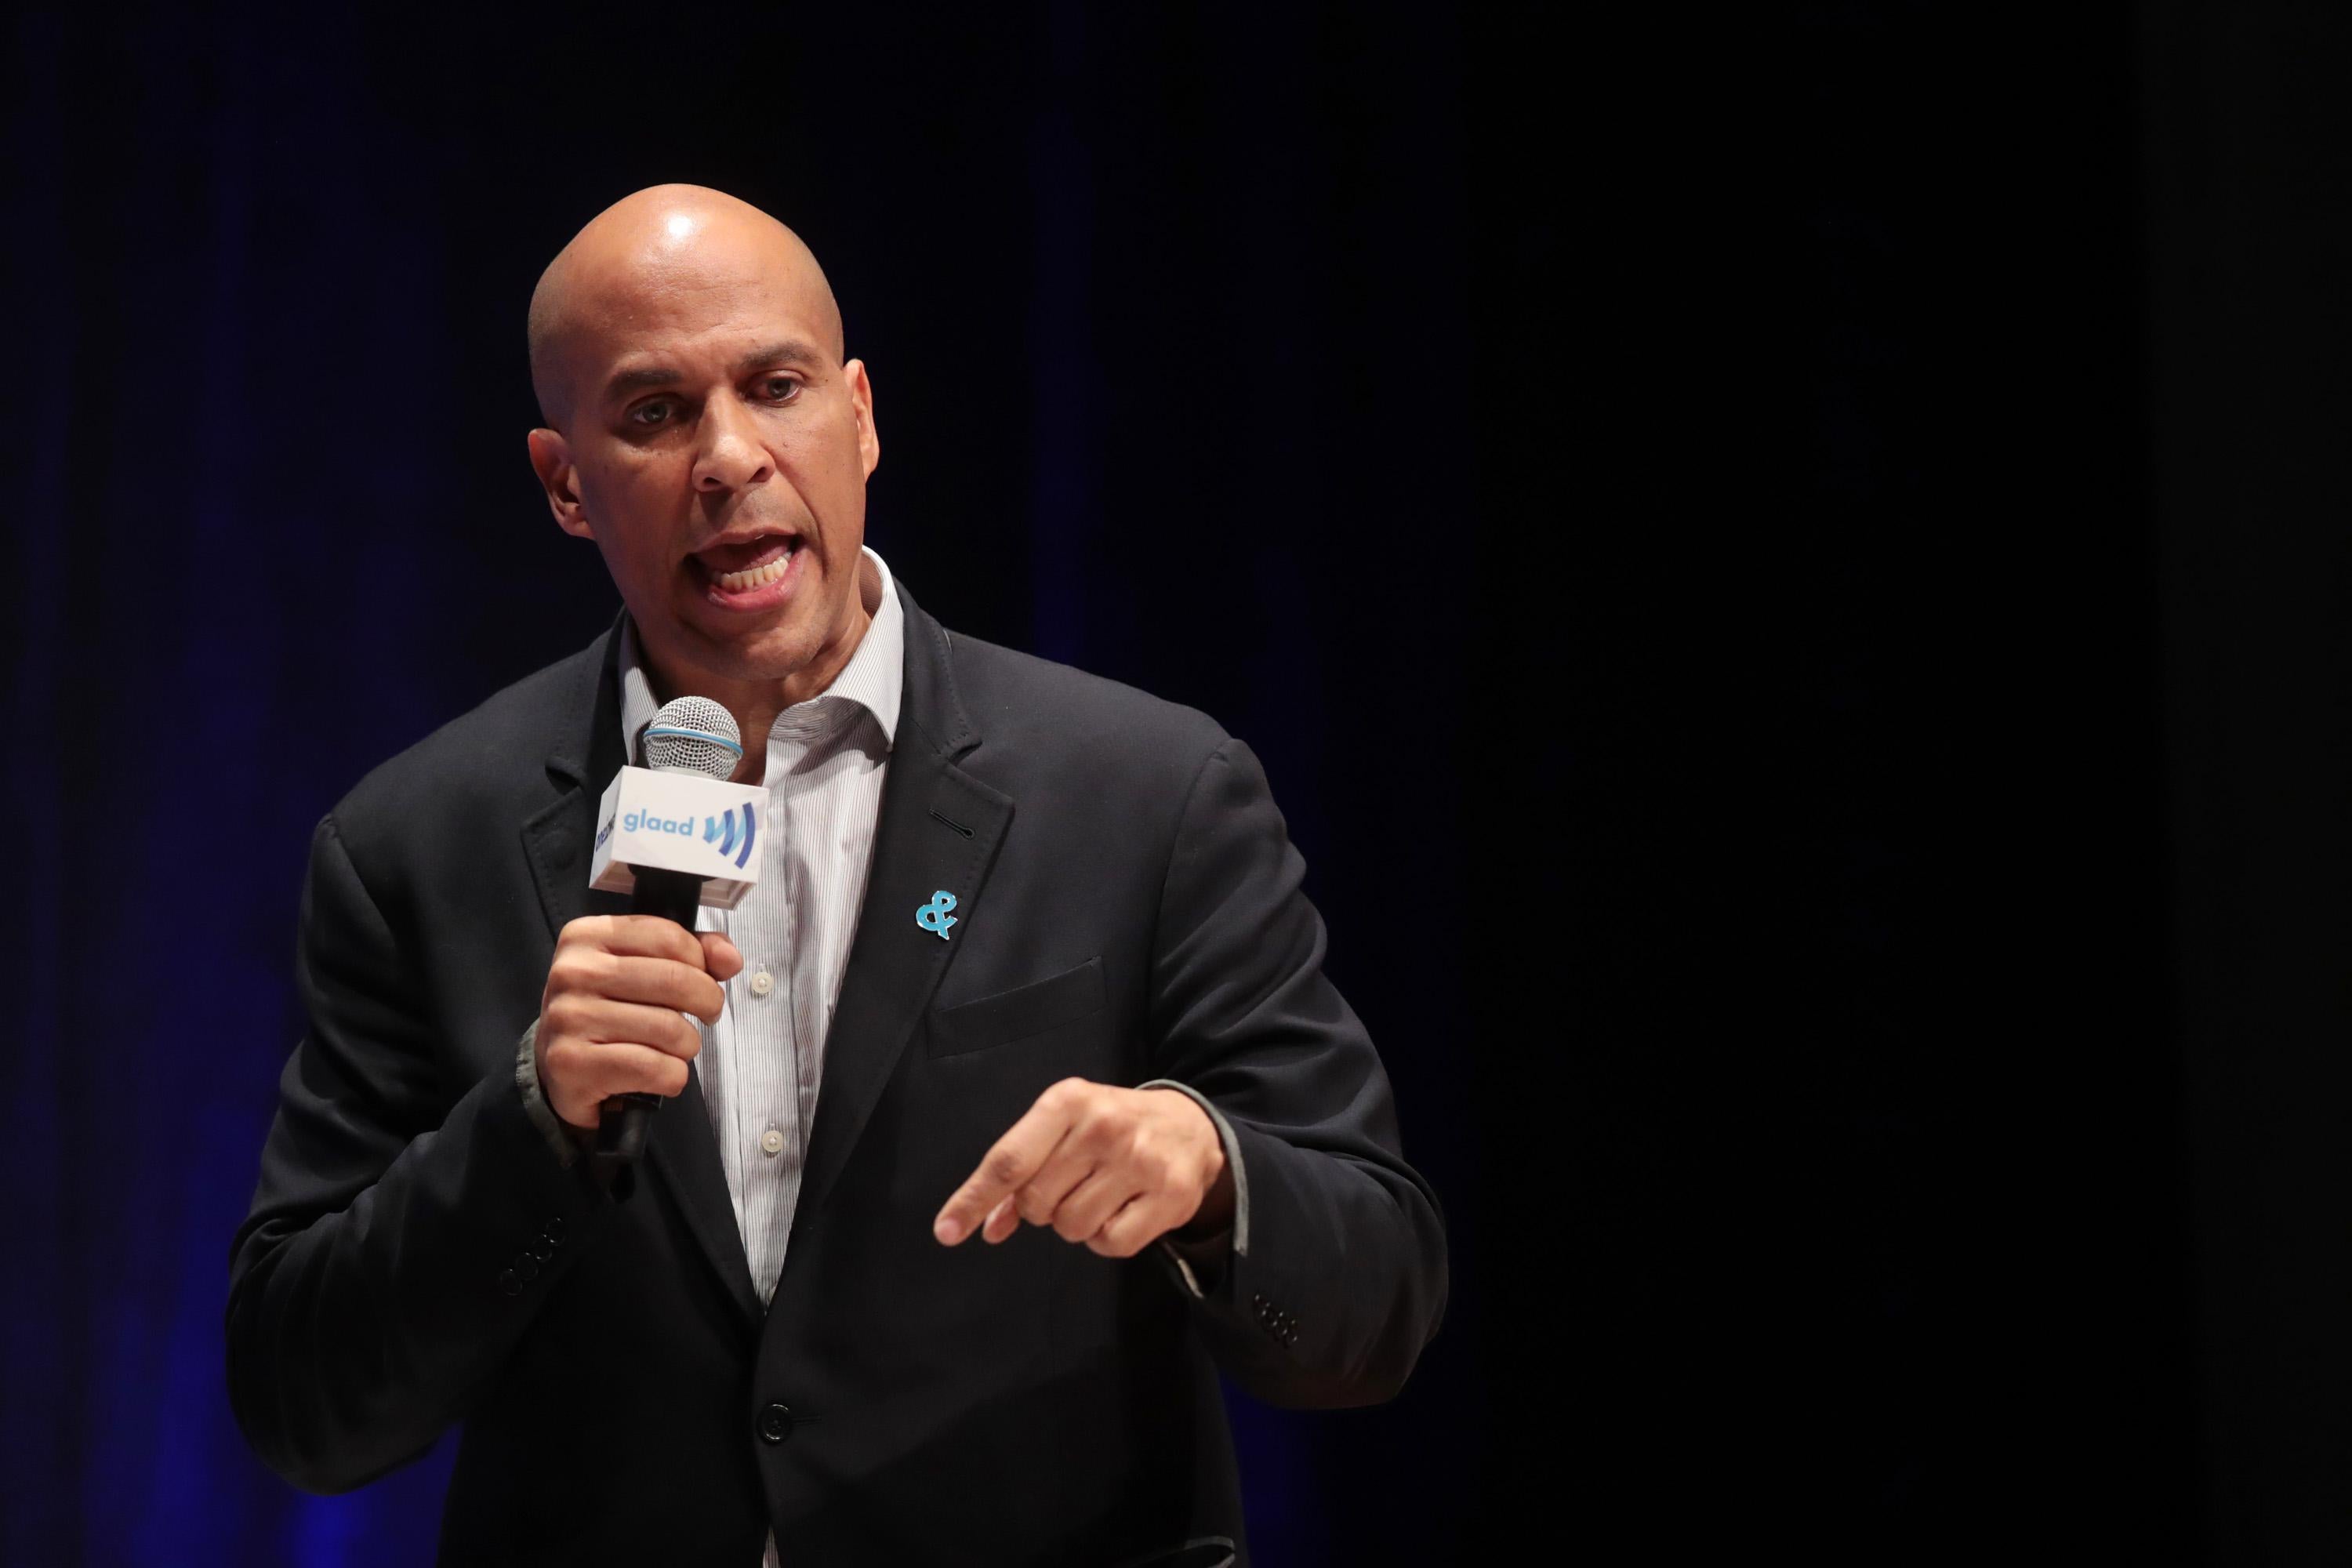 Democratic presidential candidate and New Jersey senator Cory Booker speaks at an LGBTQ presidential forum at Coe College’s Sinclair Auditorium on September 20, 2019 in Cedar Rapids, Iowa.